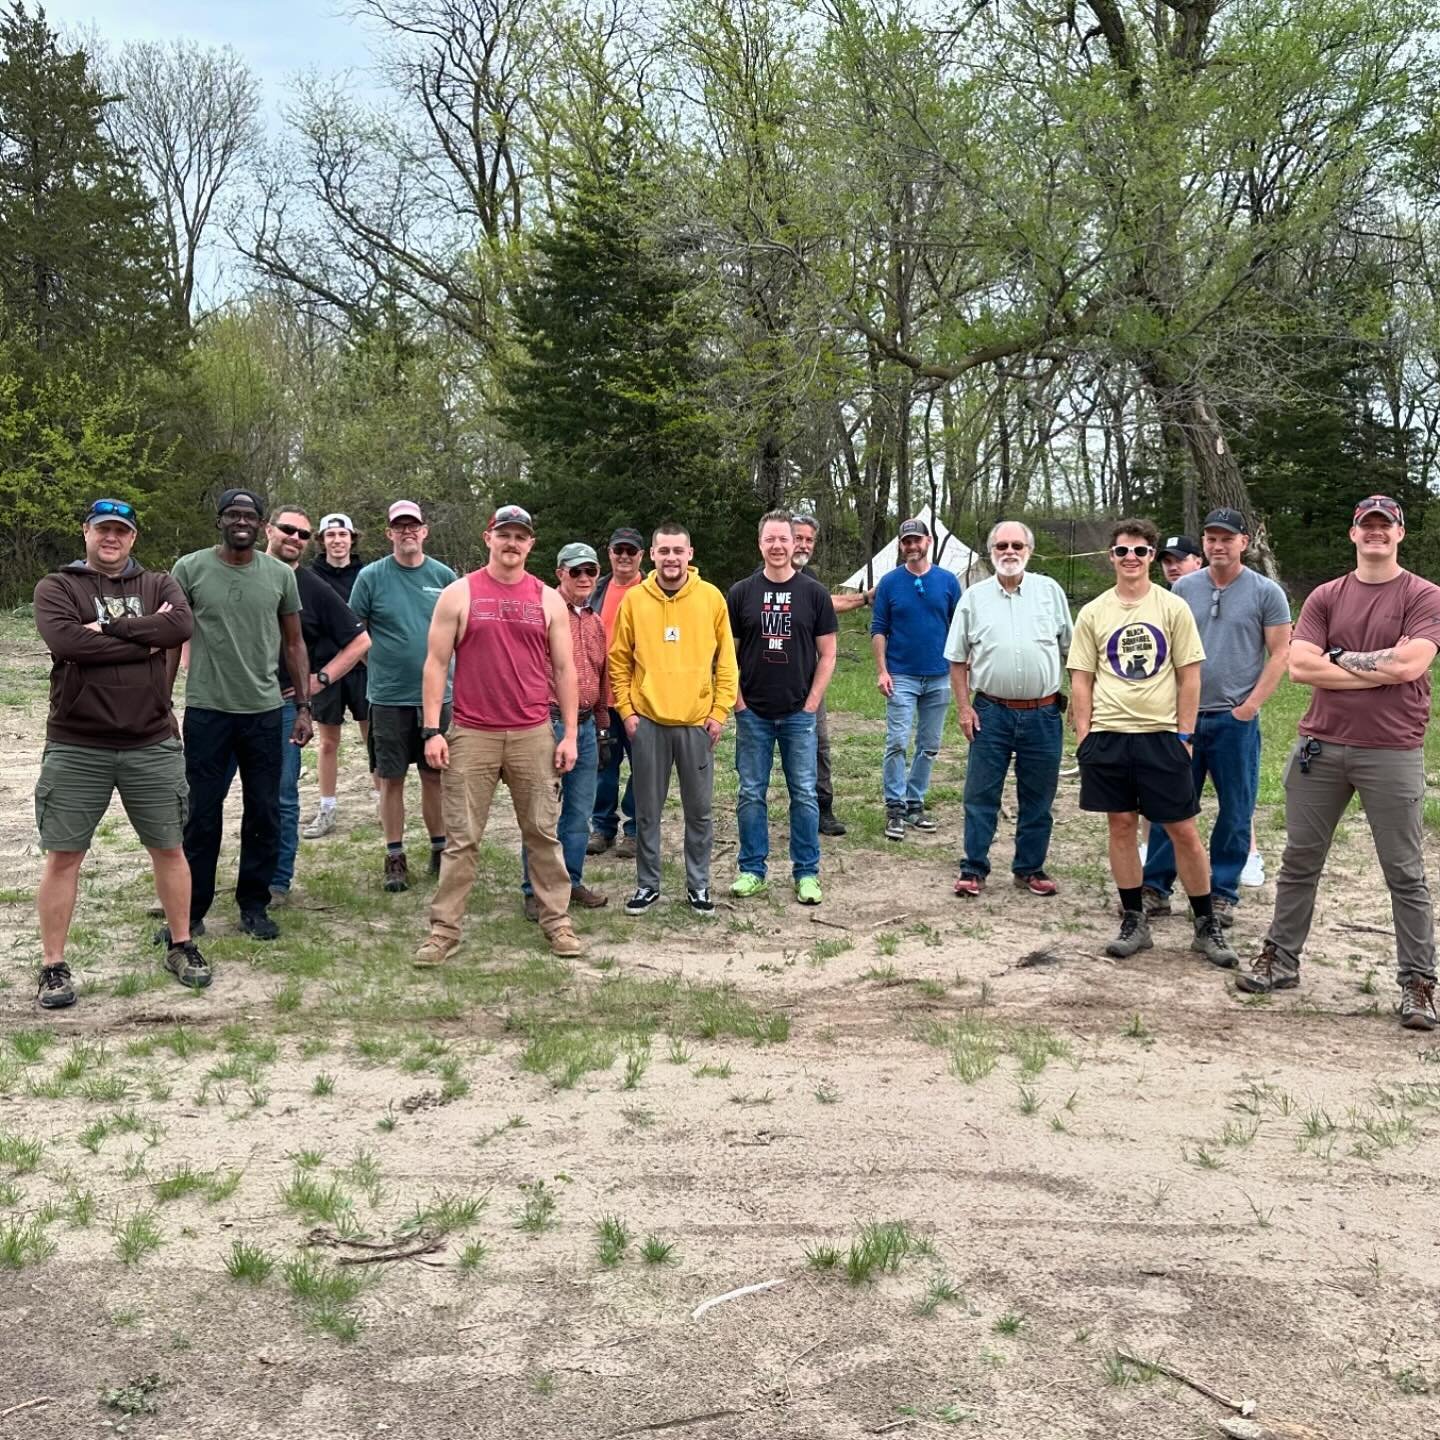 Tribe men had a great time at the Annual Men&rsquo;s Spring Retreat today! They threw axes, played games, heard an inspiring word from Bob Ireland, and connected with each other. 🪓 

To wrap up the day, they headed back to Tribe and set up a basketb